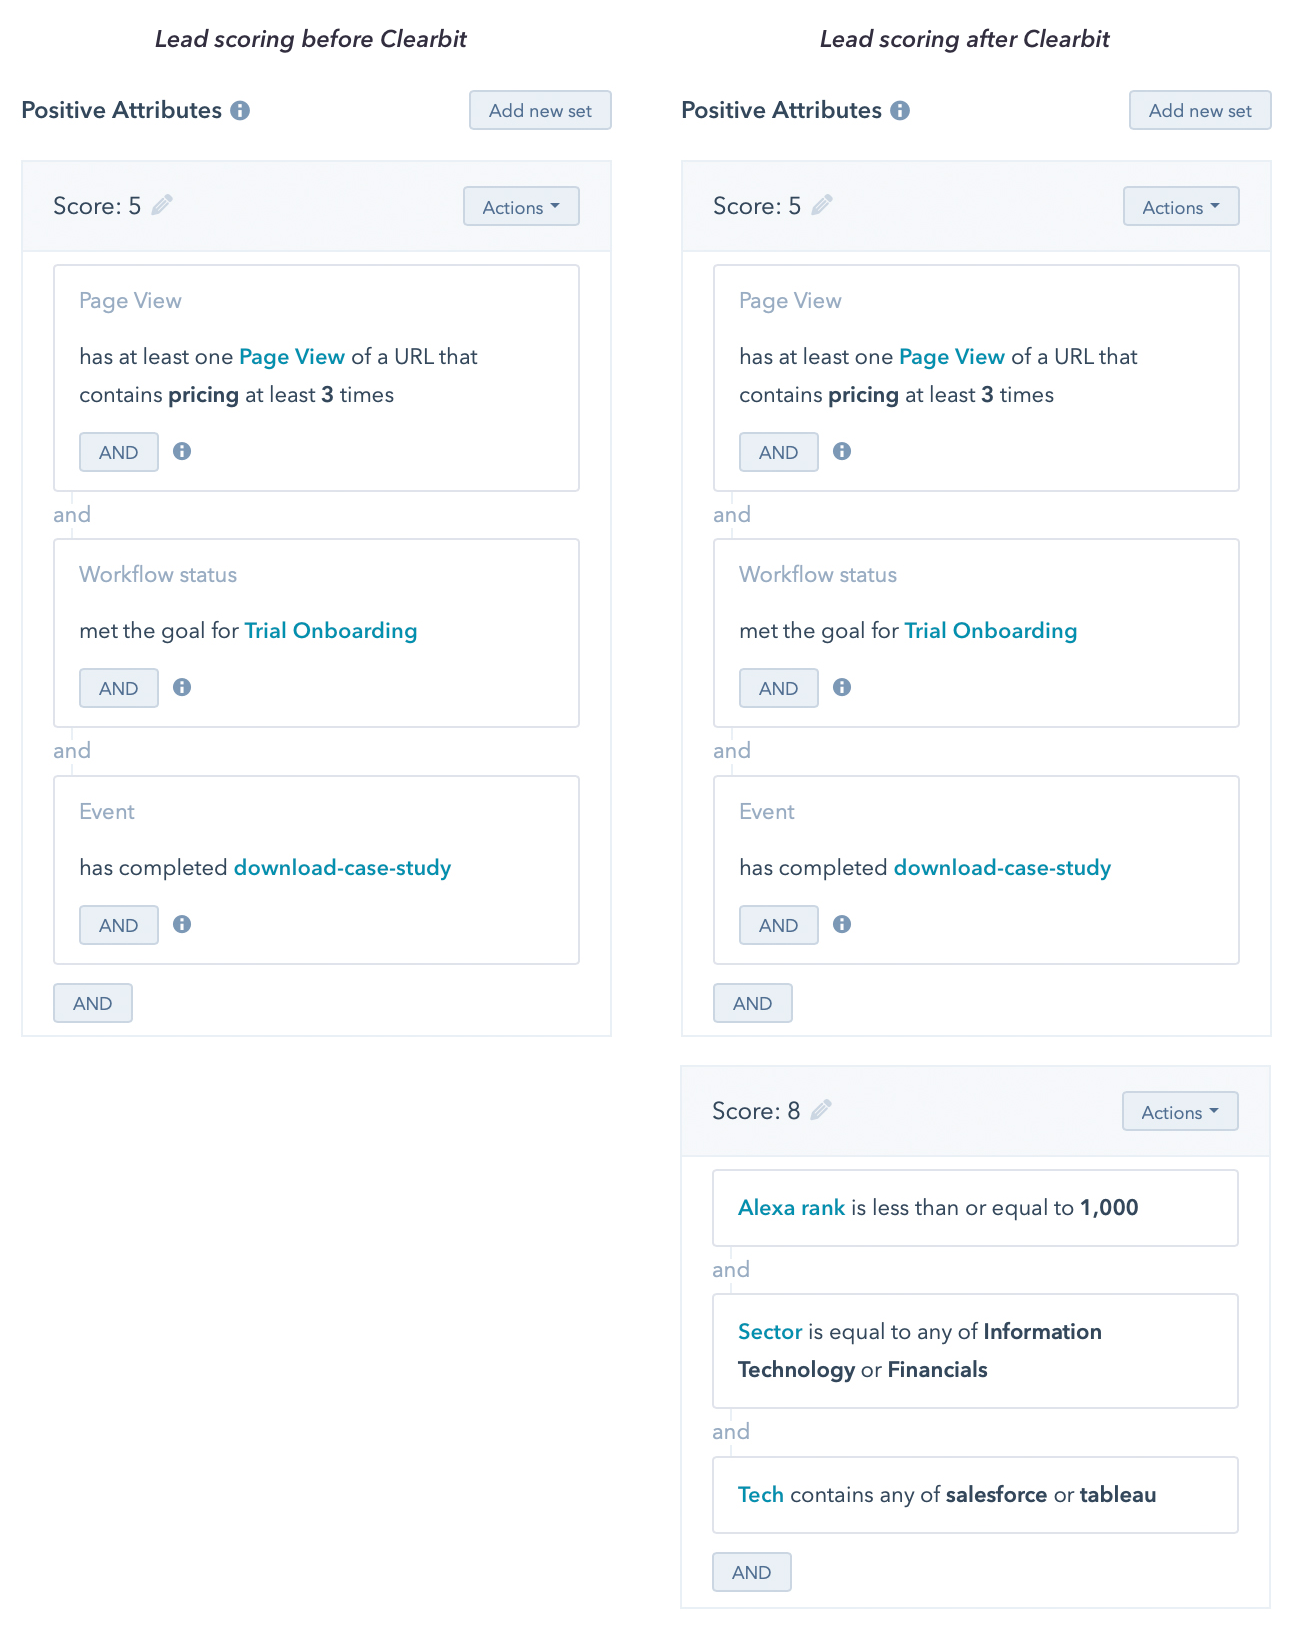 Clearbit-enriched HubSpot lead scoring